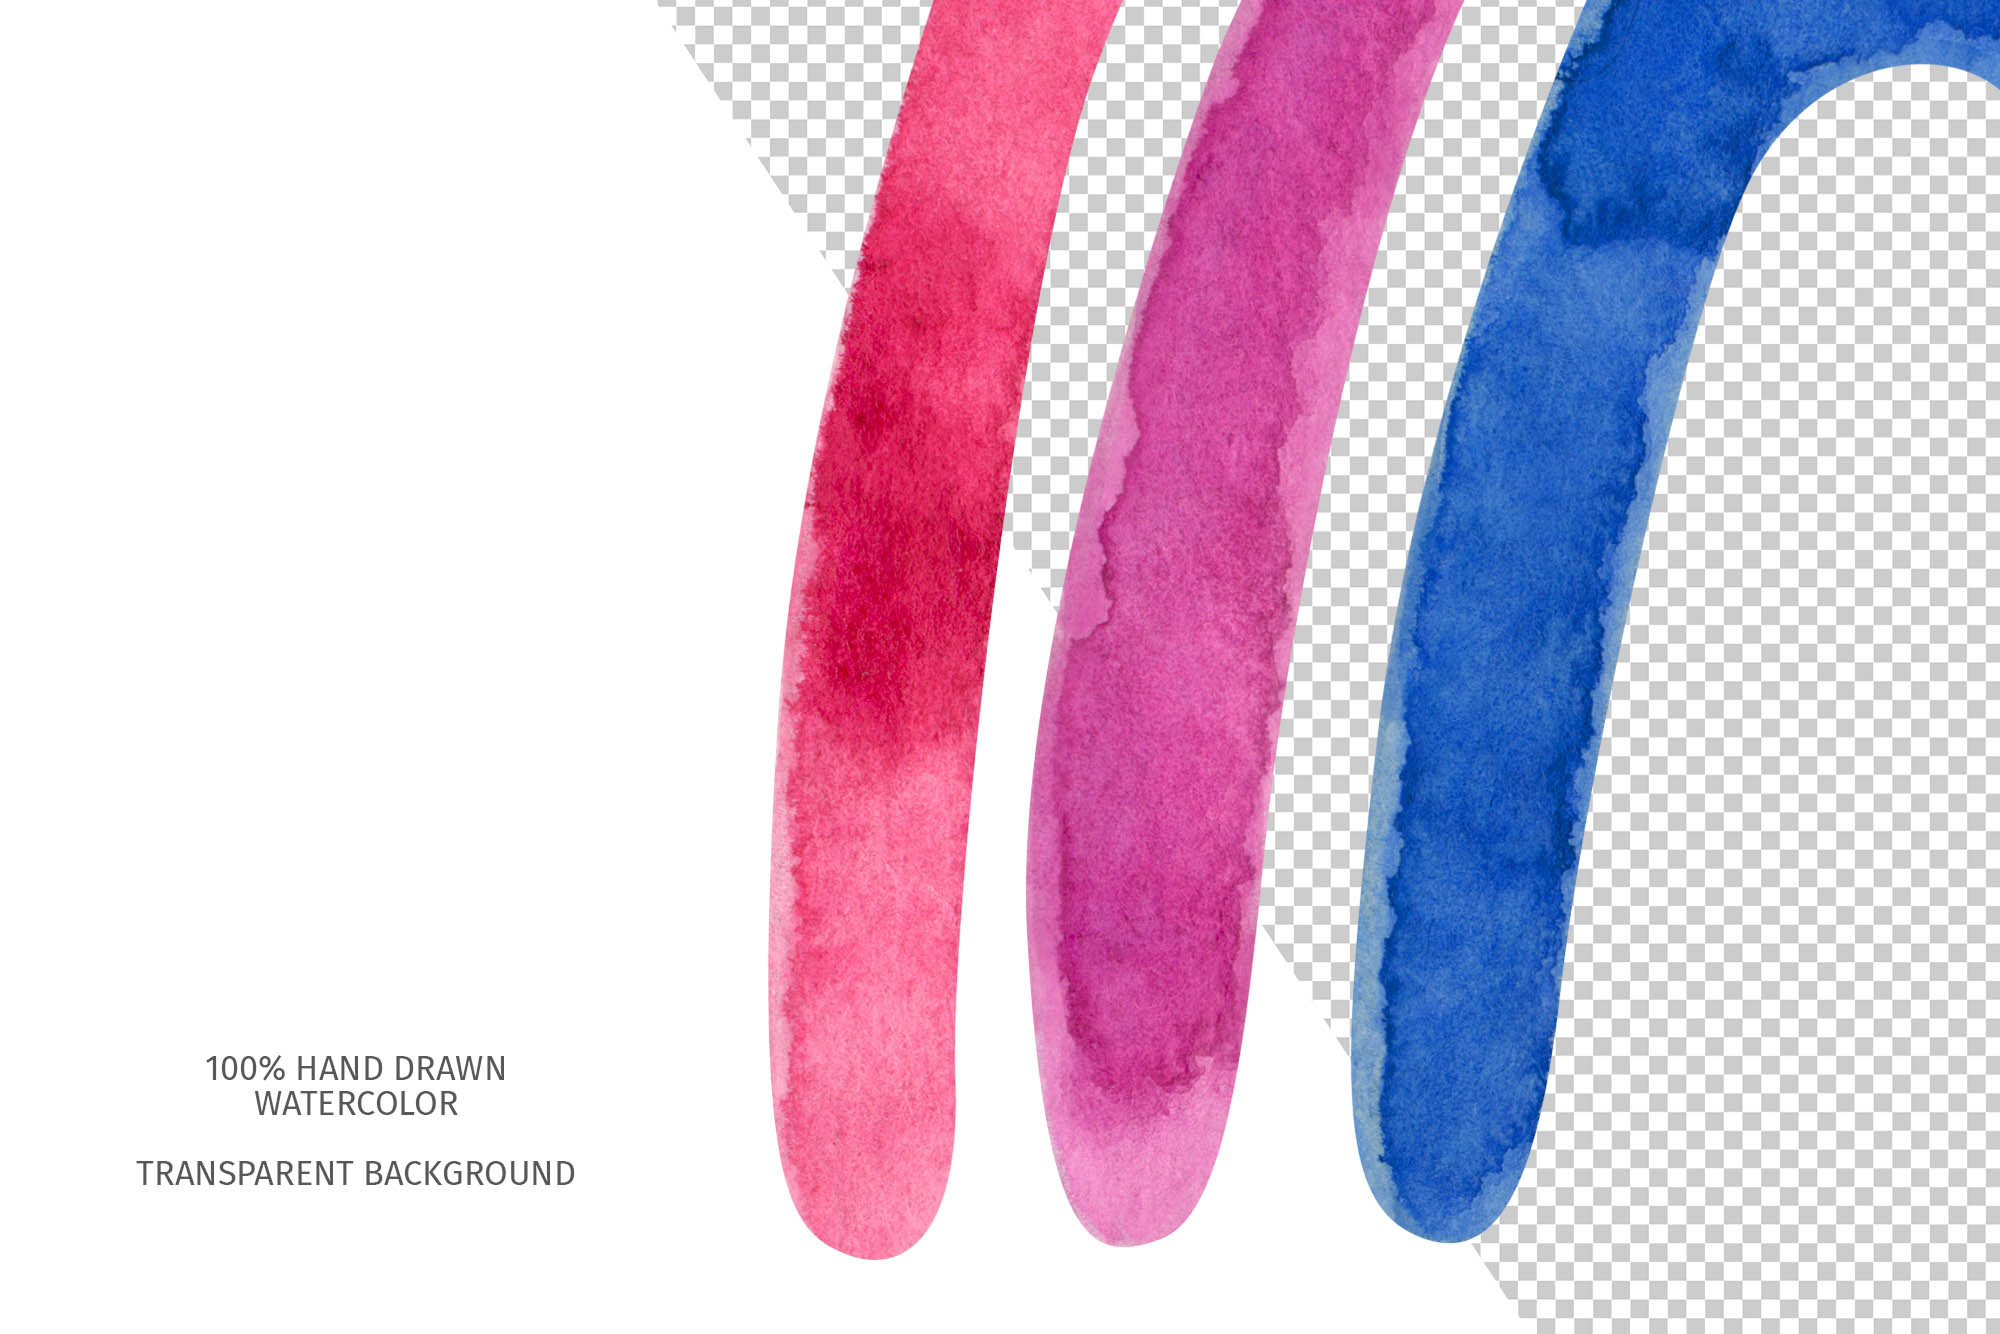 Bisexual pride watercolor clipart and seamless patterns transparent backgrounds.